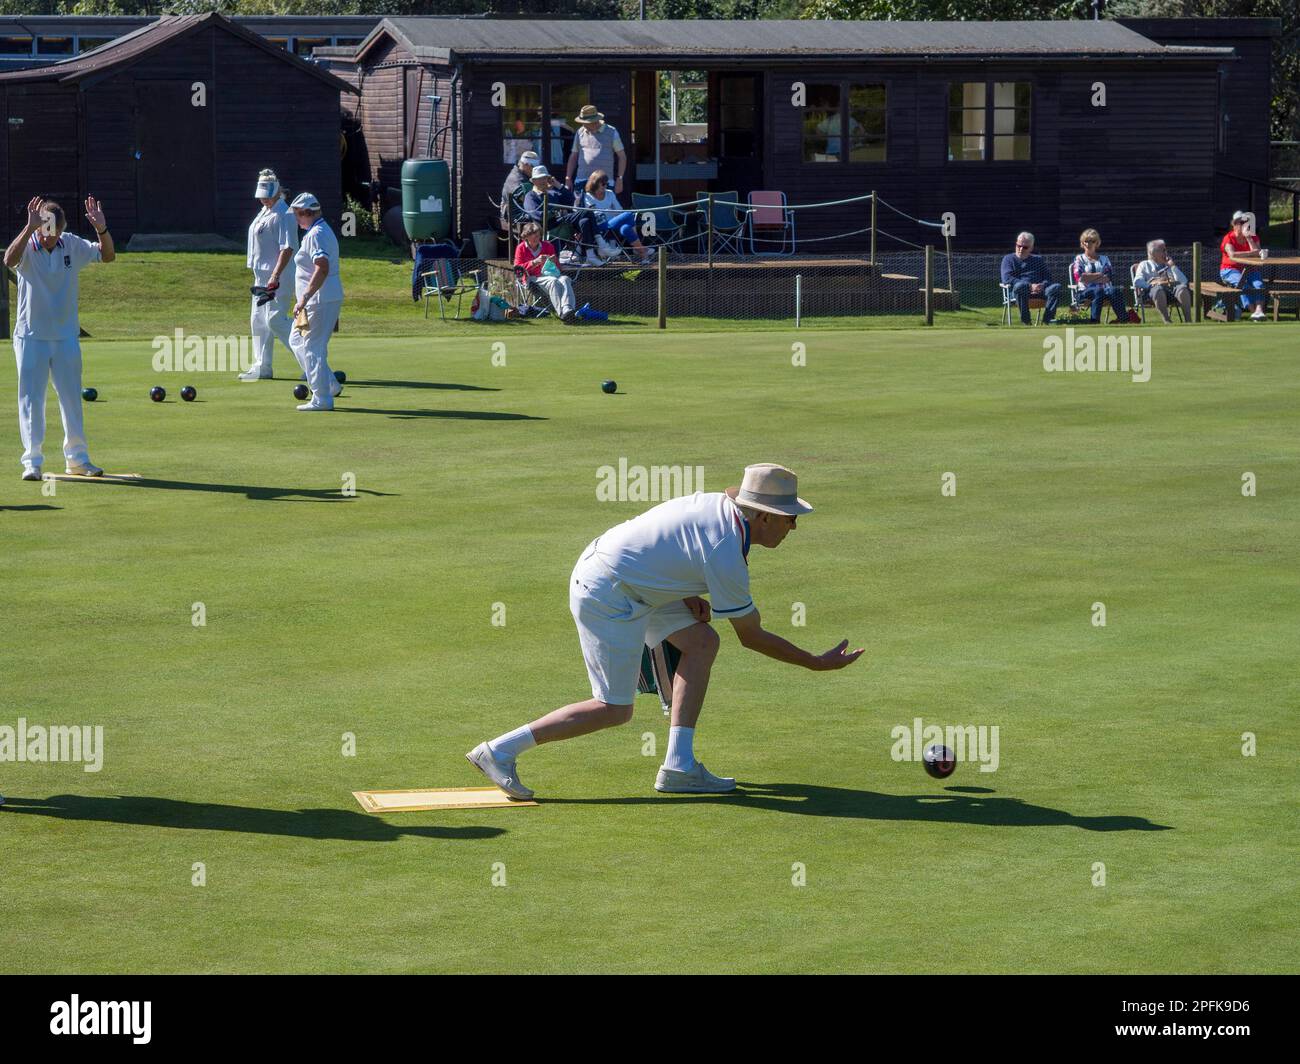 ISLE OF THORNS, SUSSEX/UK - SEPTEMBER 11 : Lawn Bowls Match at Isle of Thorns Chelwood Gate in Sussex on September 11, 2016. Unidentified people Stock Photo